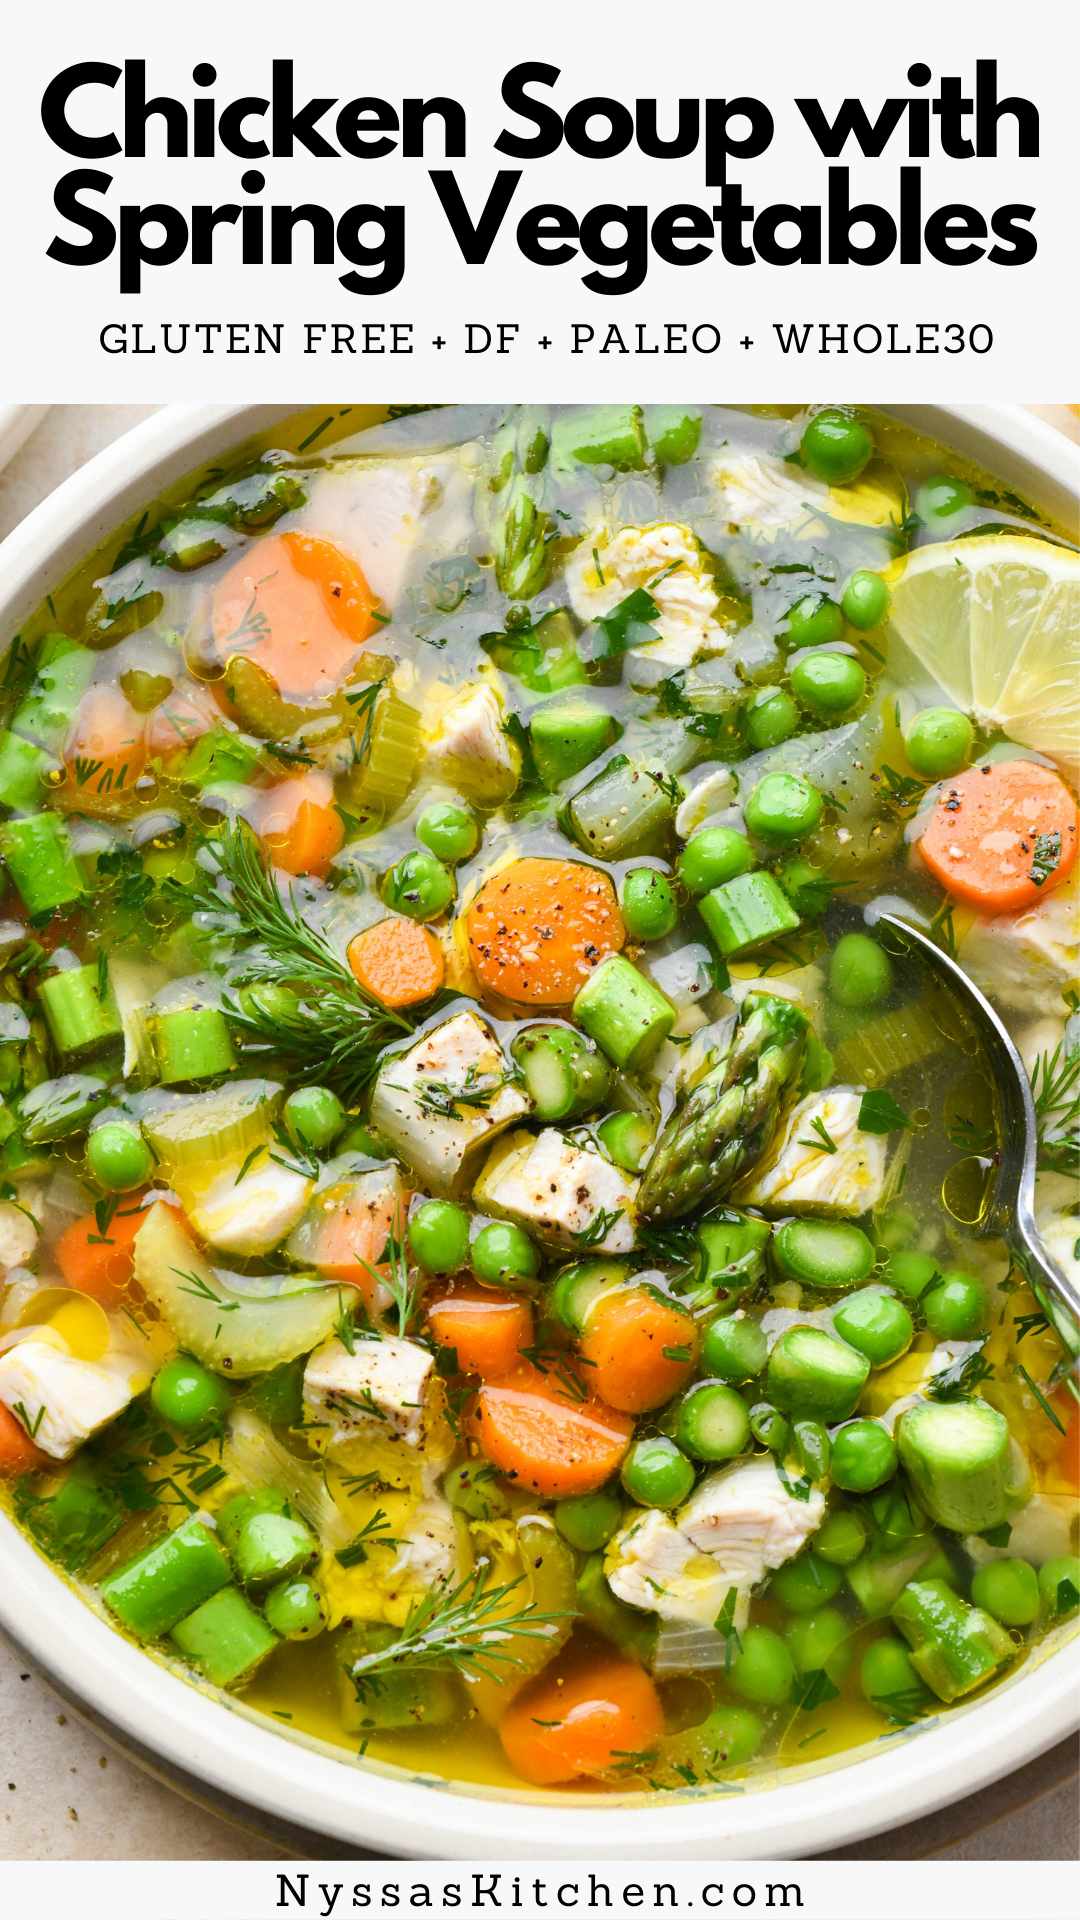 Chicken soup with spring vegetables is a delicious, nutrient dense soup that bridges the gap between the chilly days of winter and the fresh produce of springtime. Made with all the veggies you love in a traditional chicken soup, with the addition of peas, asparagus, fresh dill, and a burst of bright lemon juice. Protein rich and so satisfying! Whole30, paleo friendly, gluten free, and dairy free.